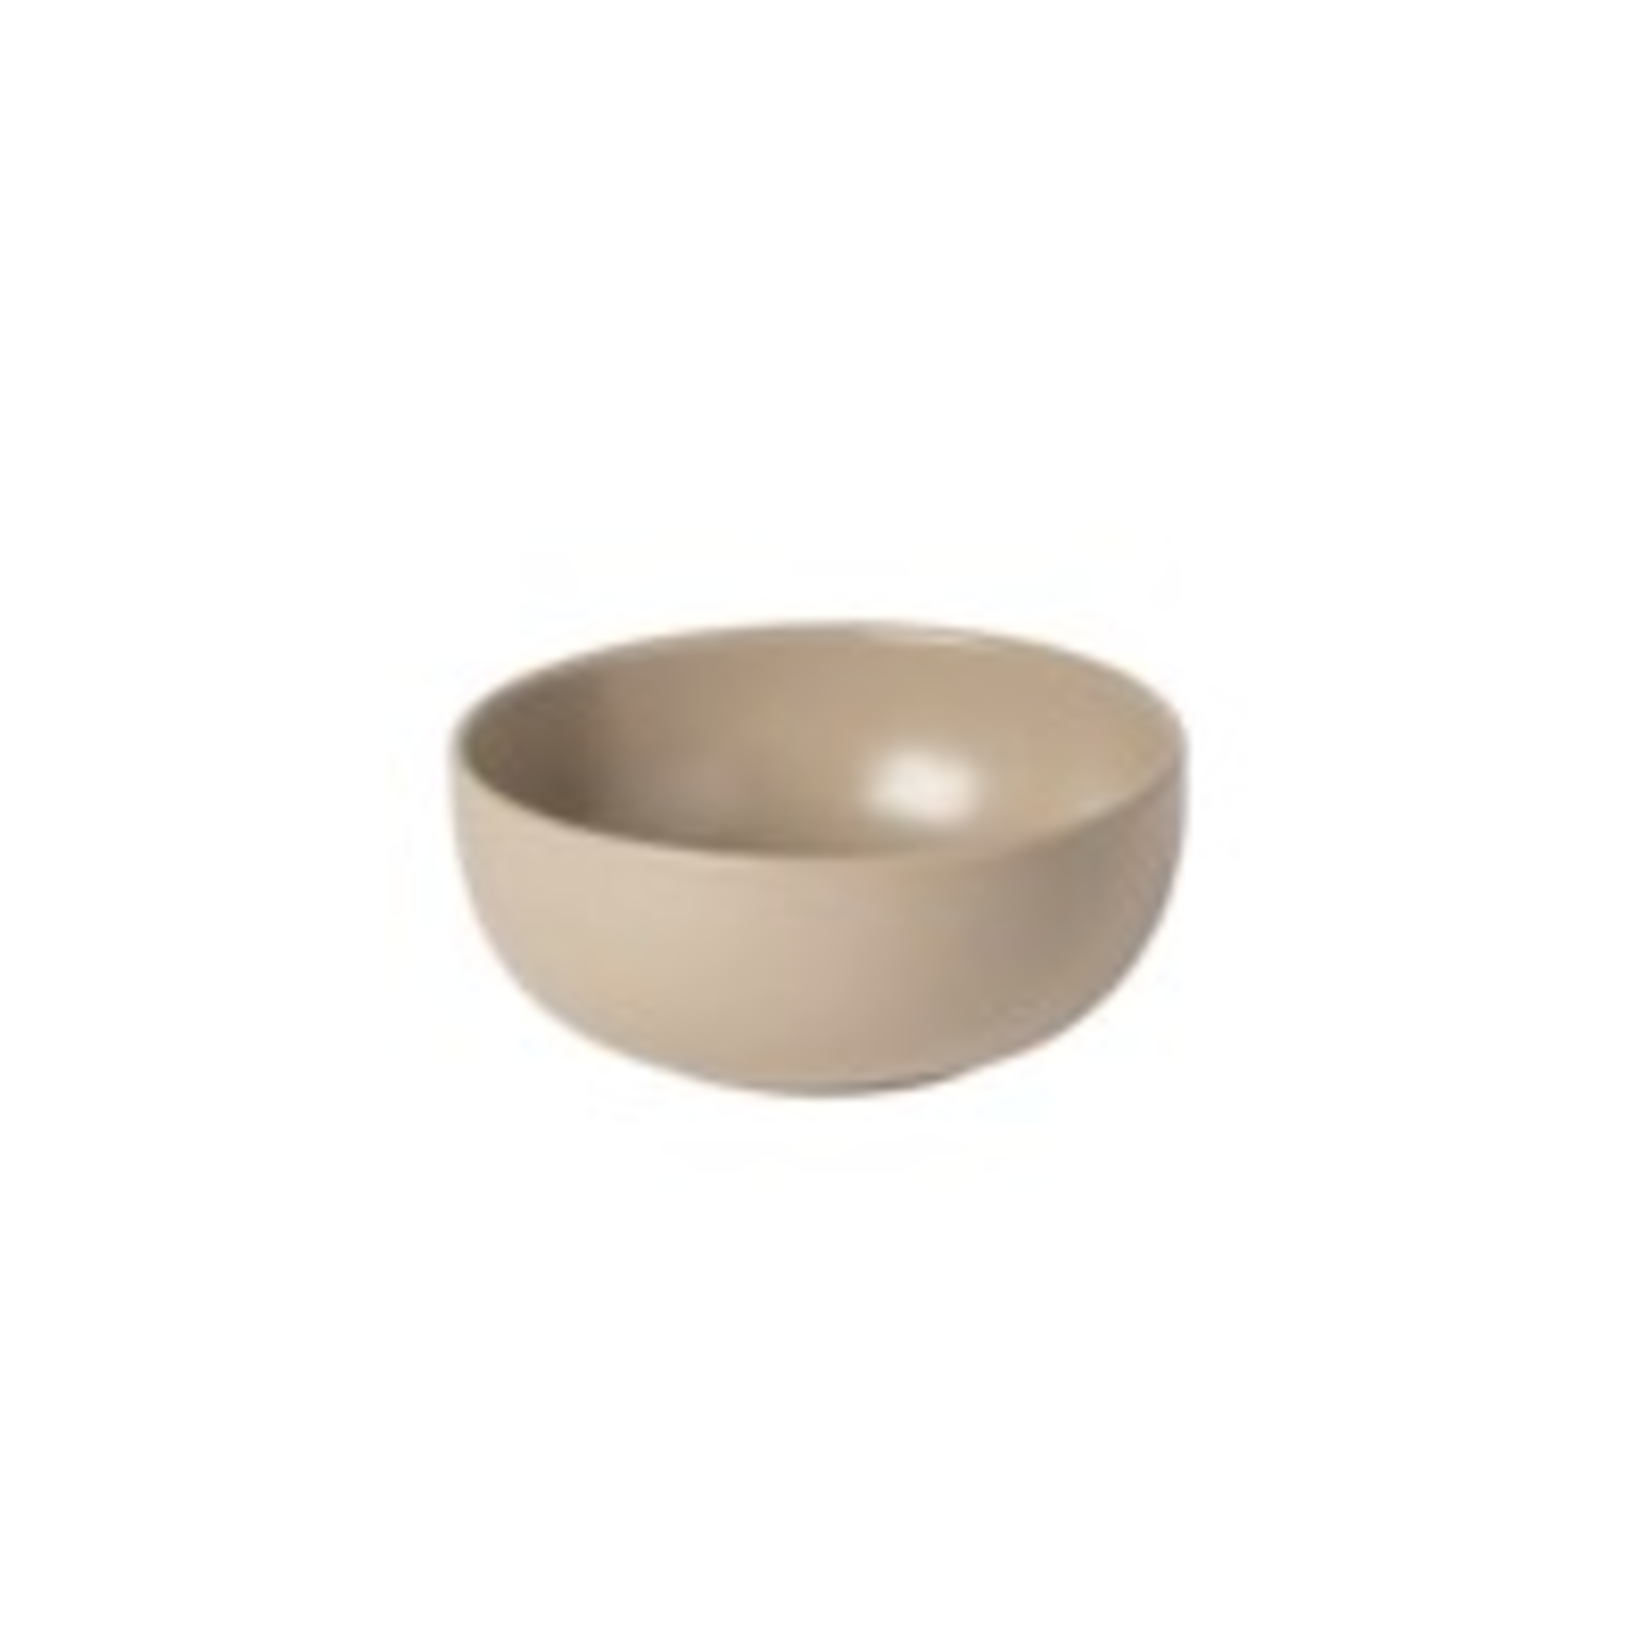 Casafina Pacifica Soup/Cereal Bowl